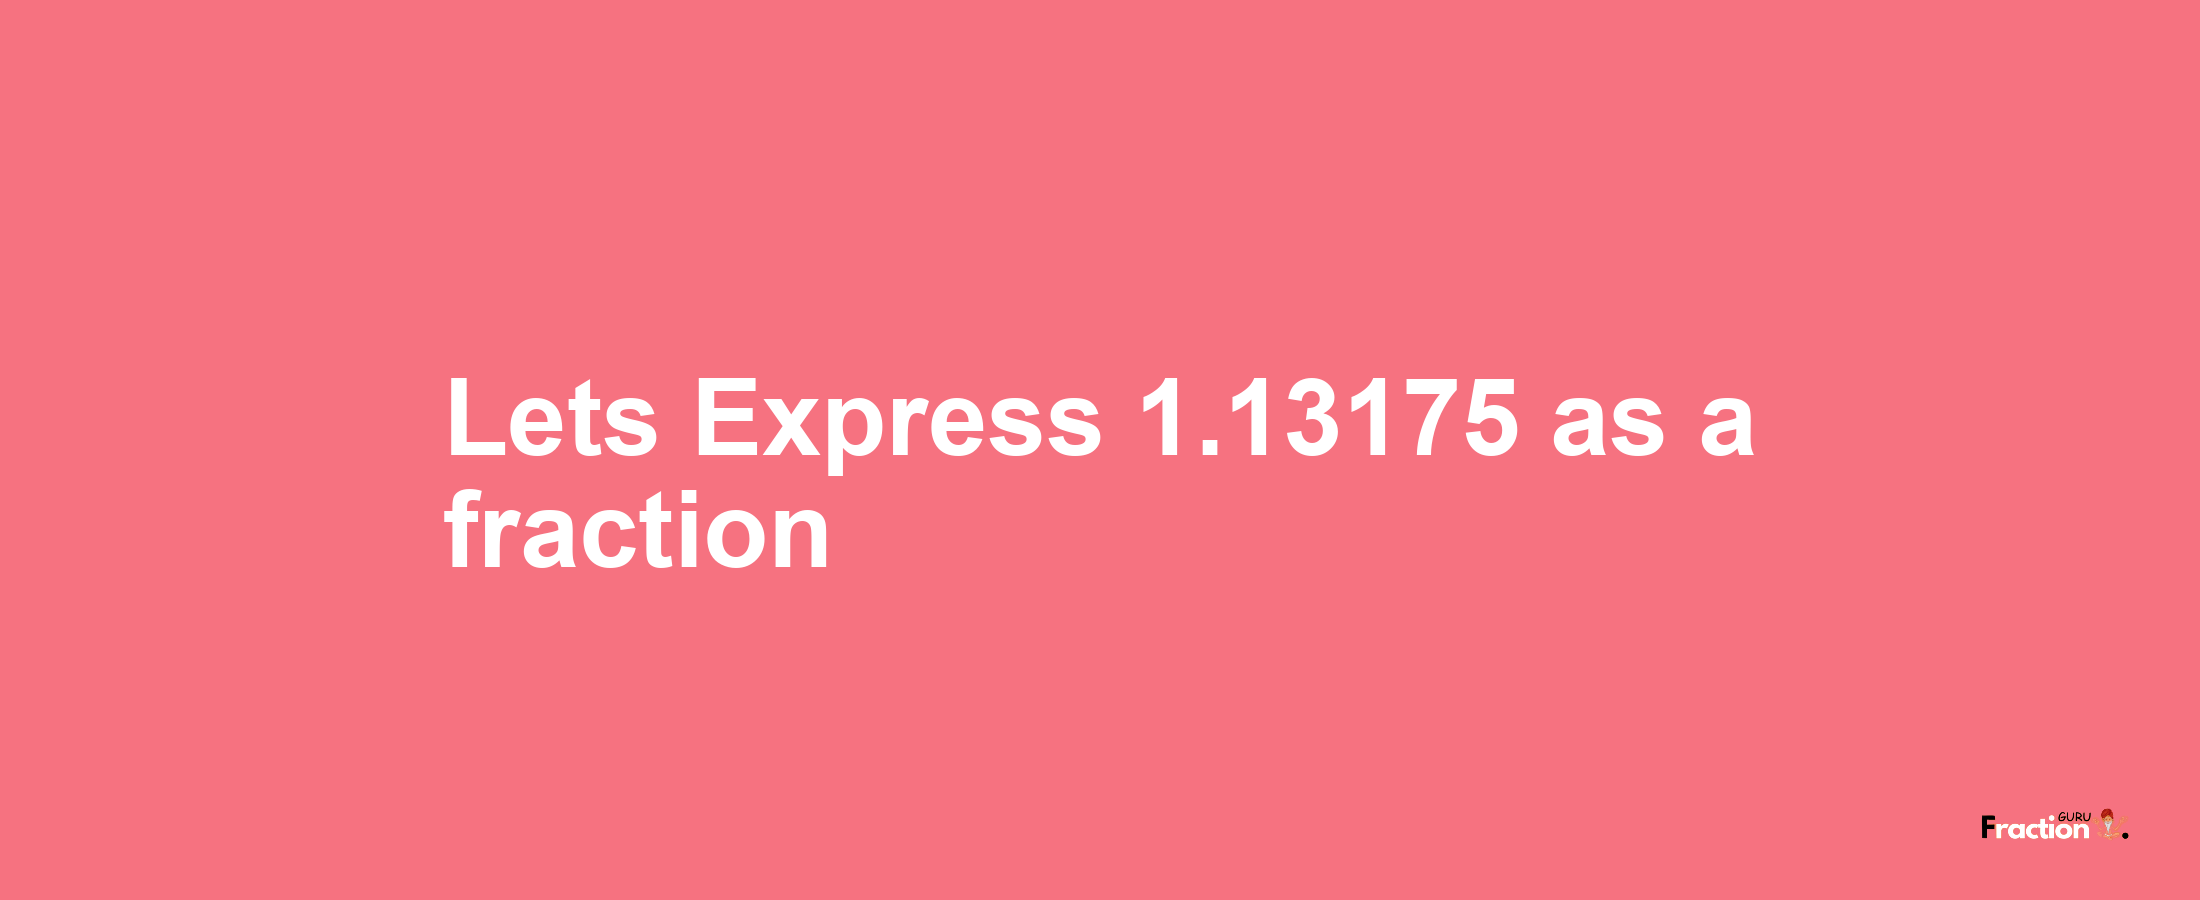 Lets Express 1.13175 as afraction